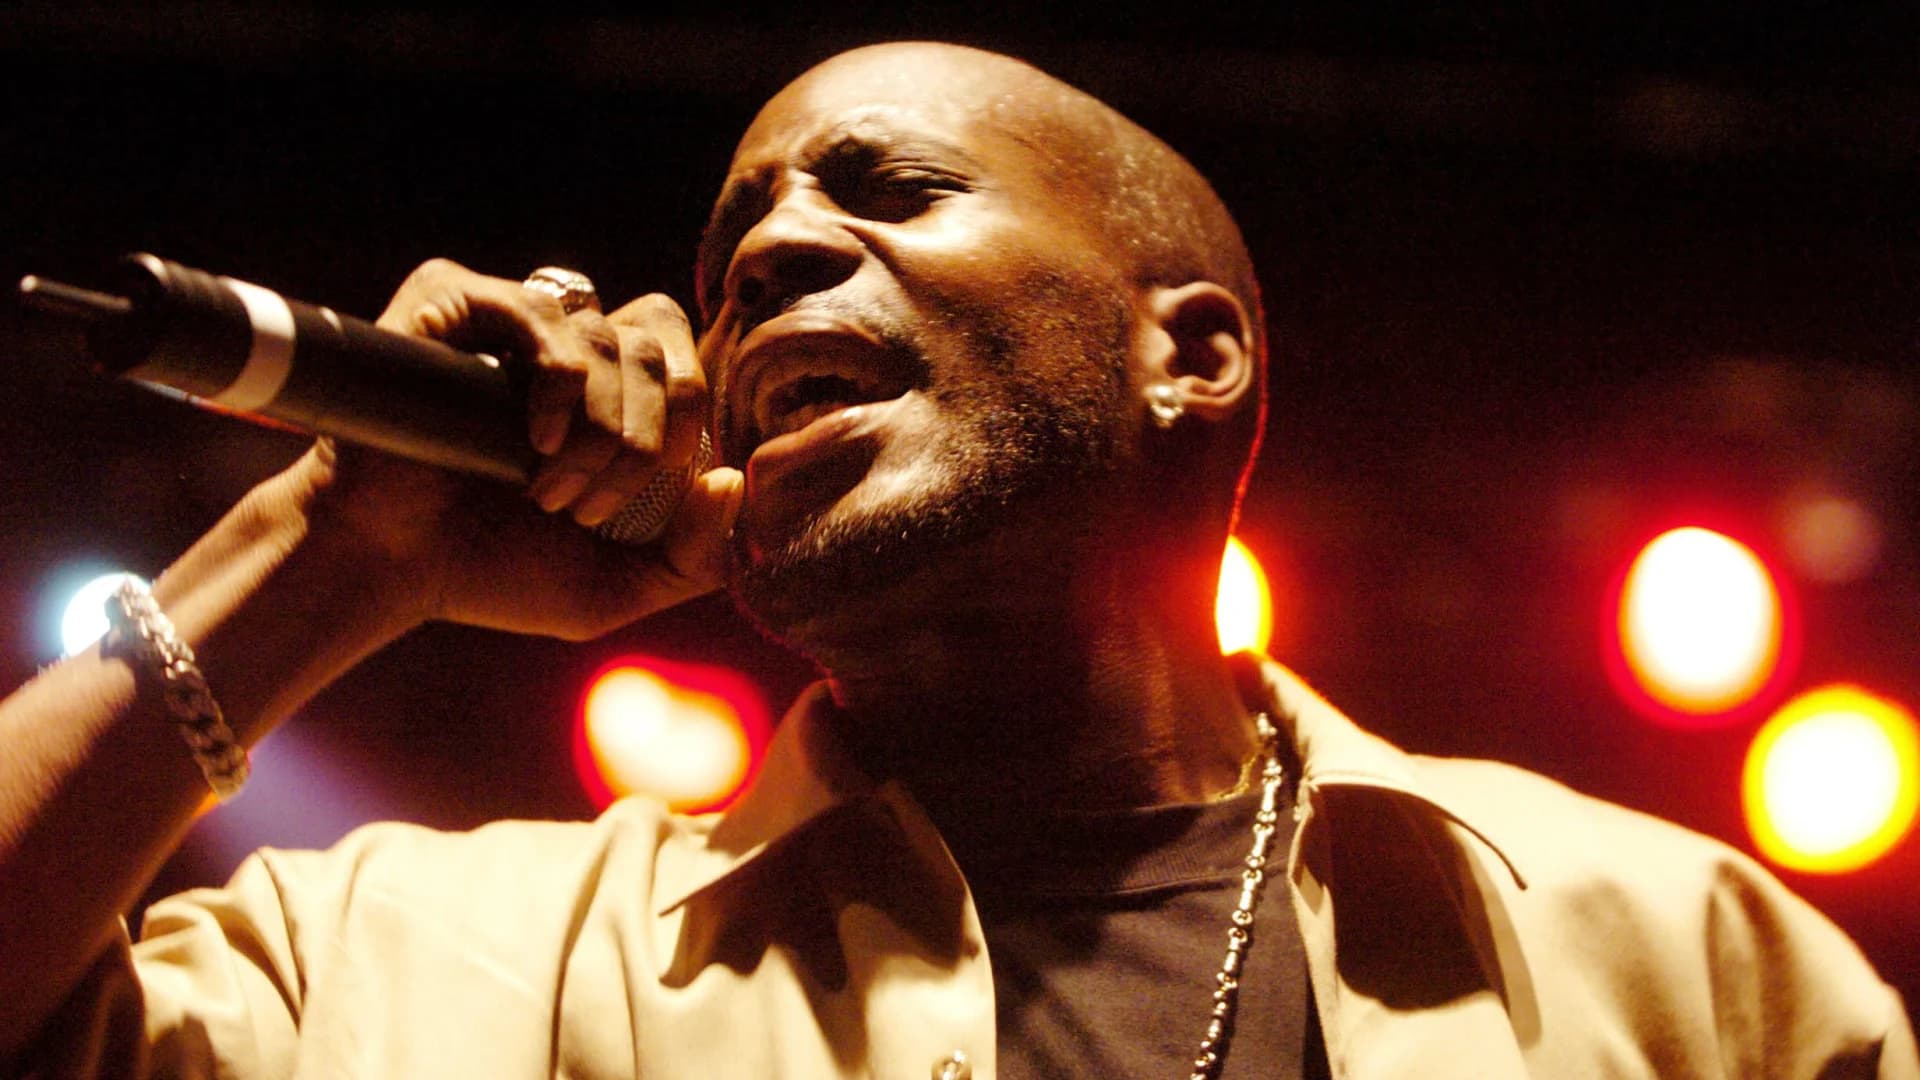 DMX immortalized by family and close friends at memorial